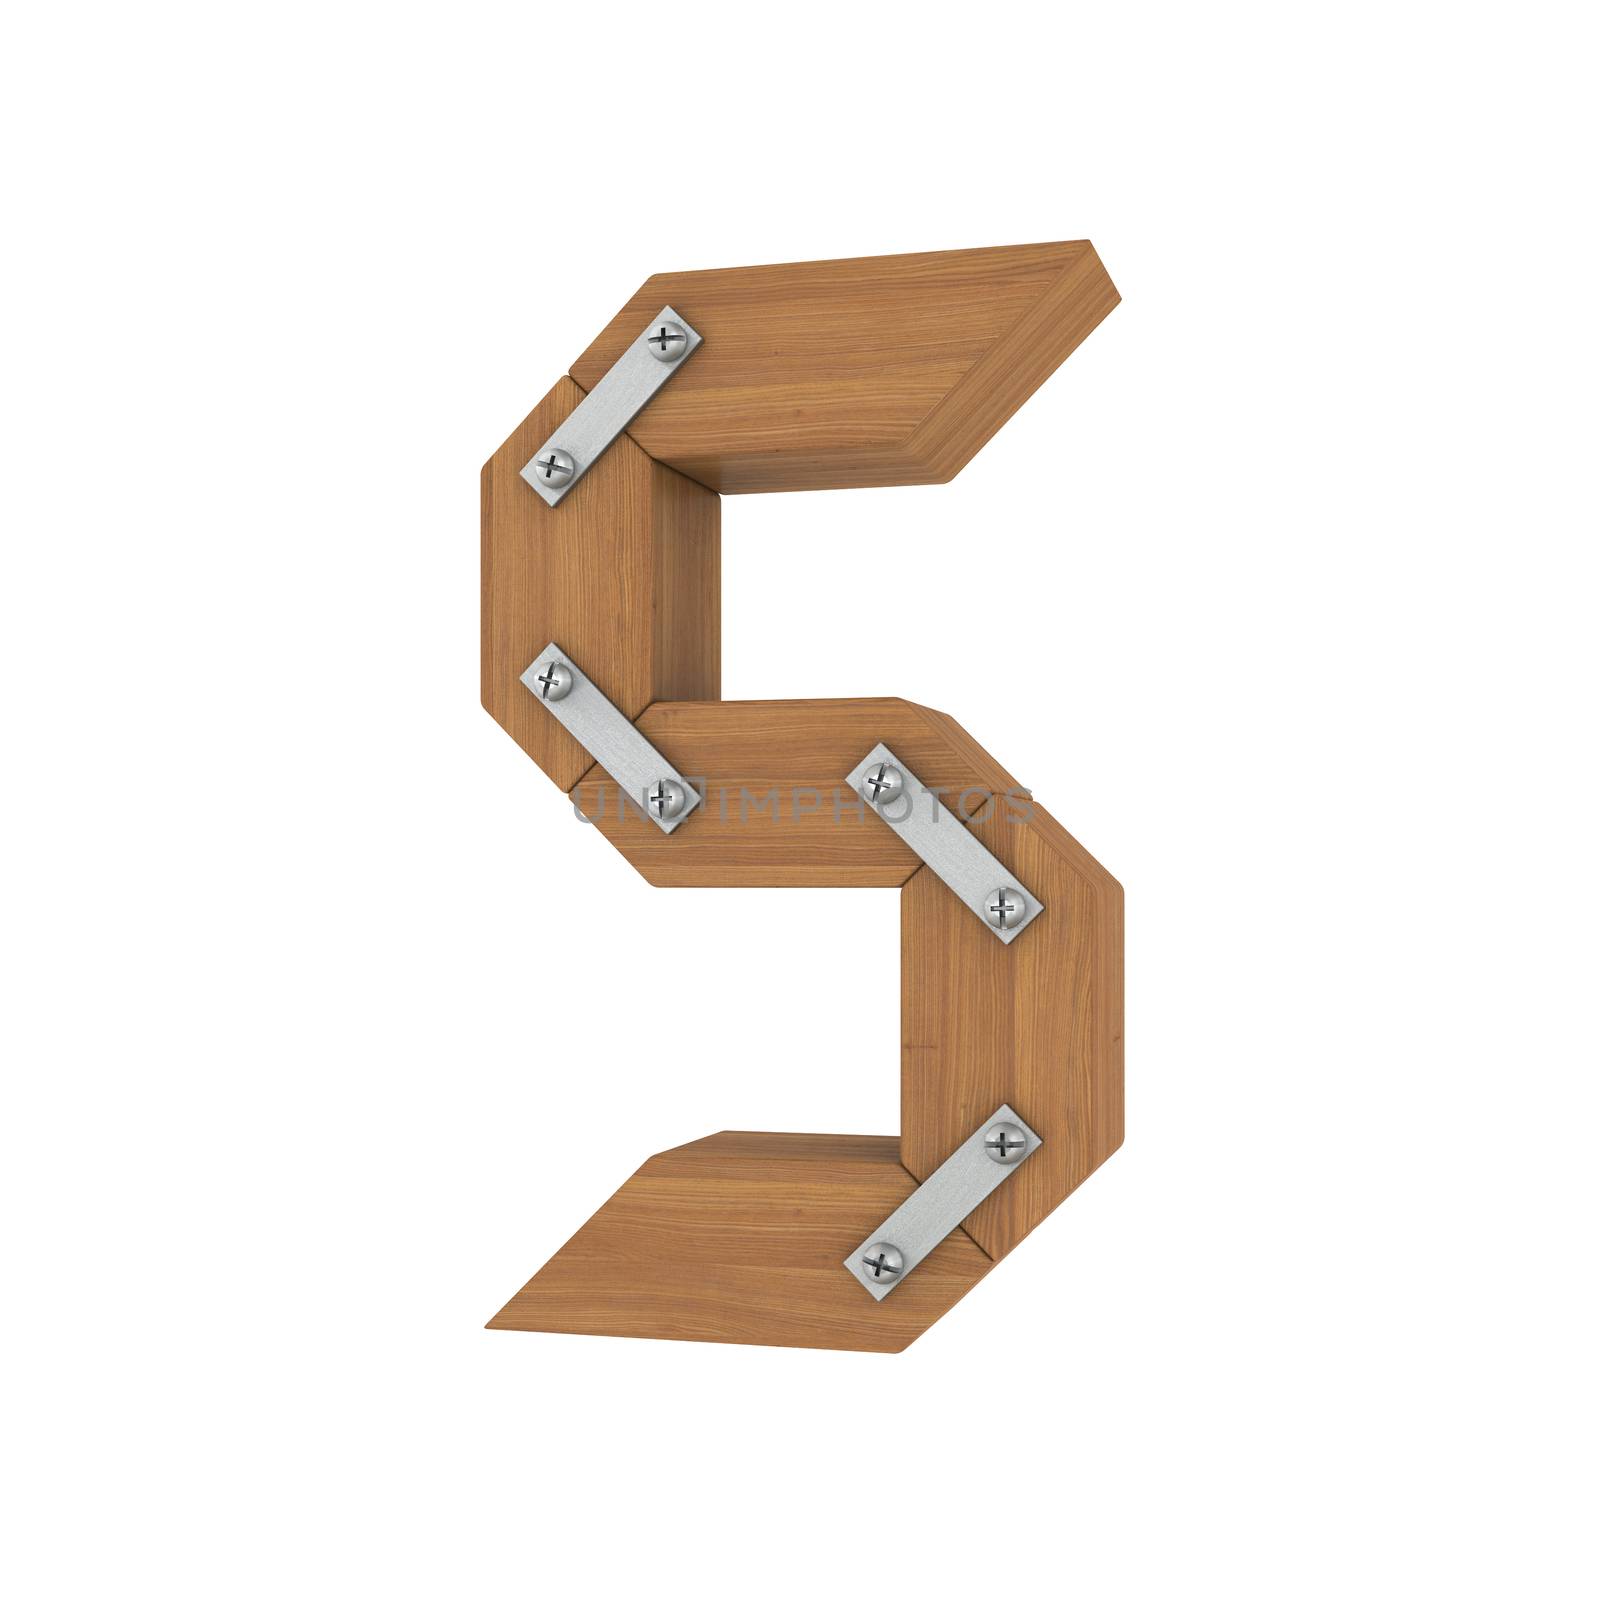 Wooden letter S. Isolated render on a white background